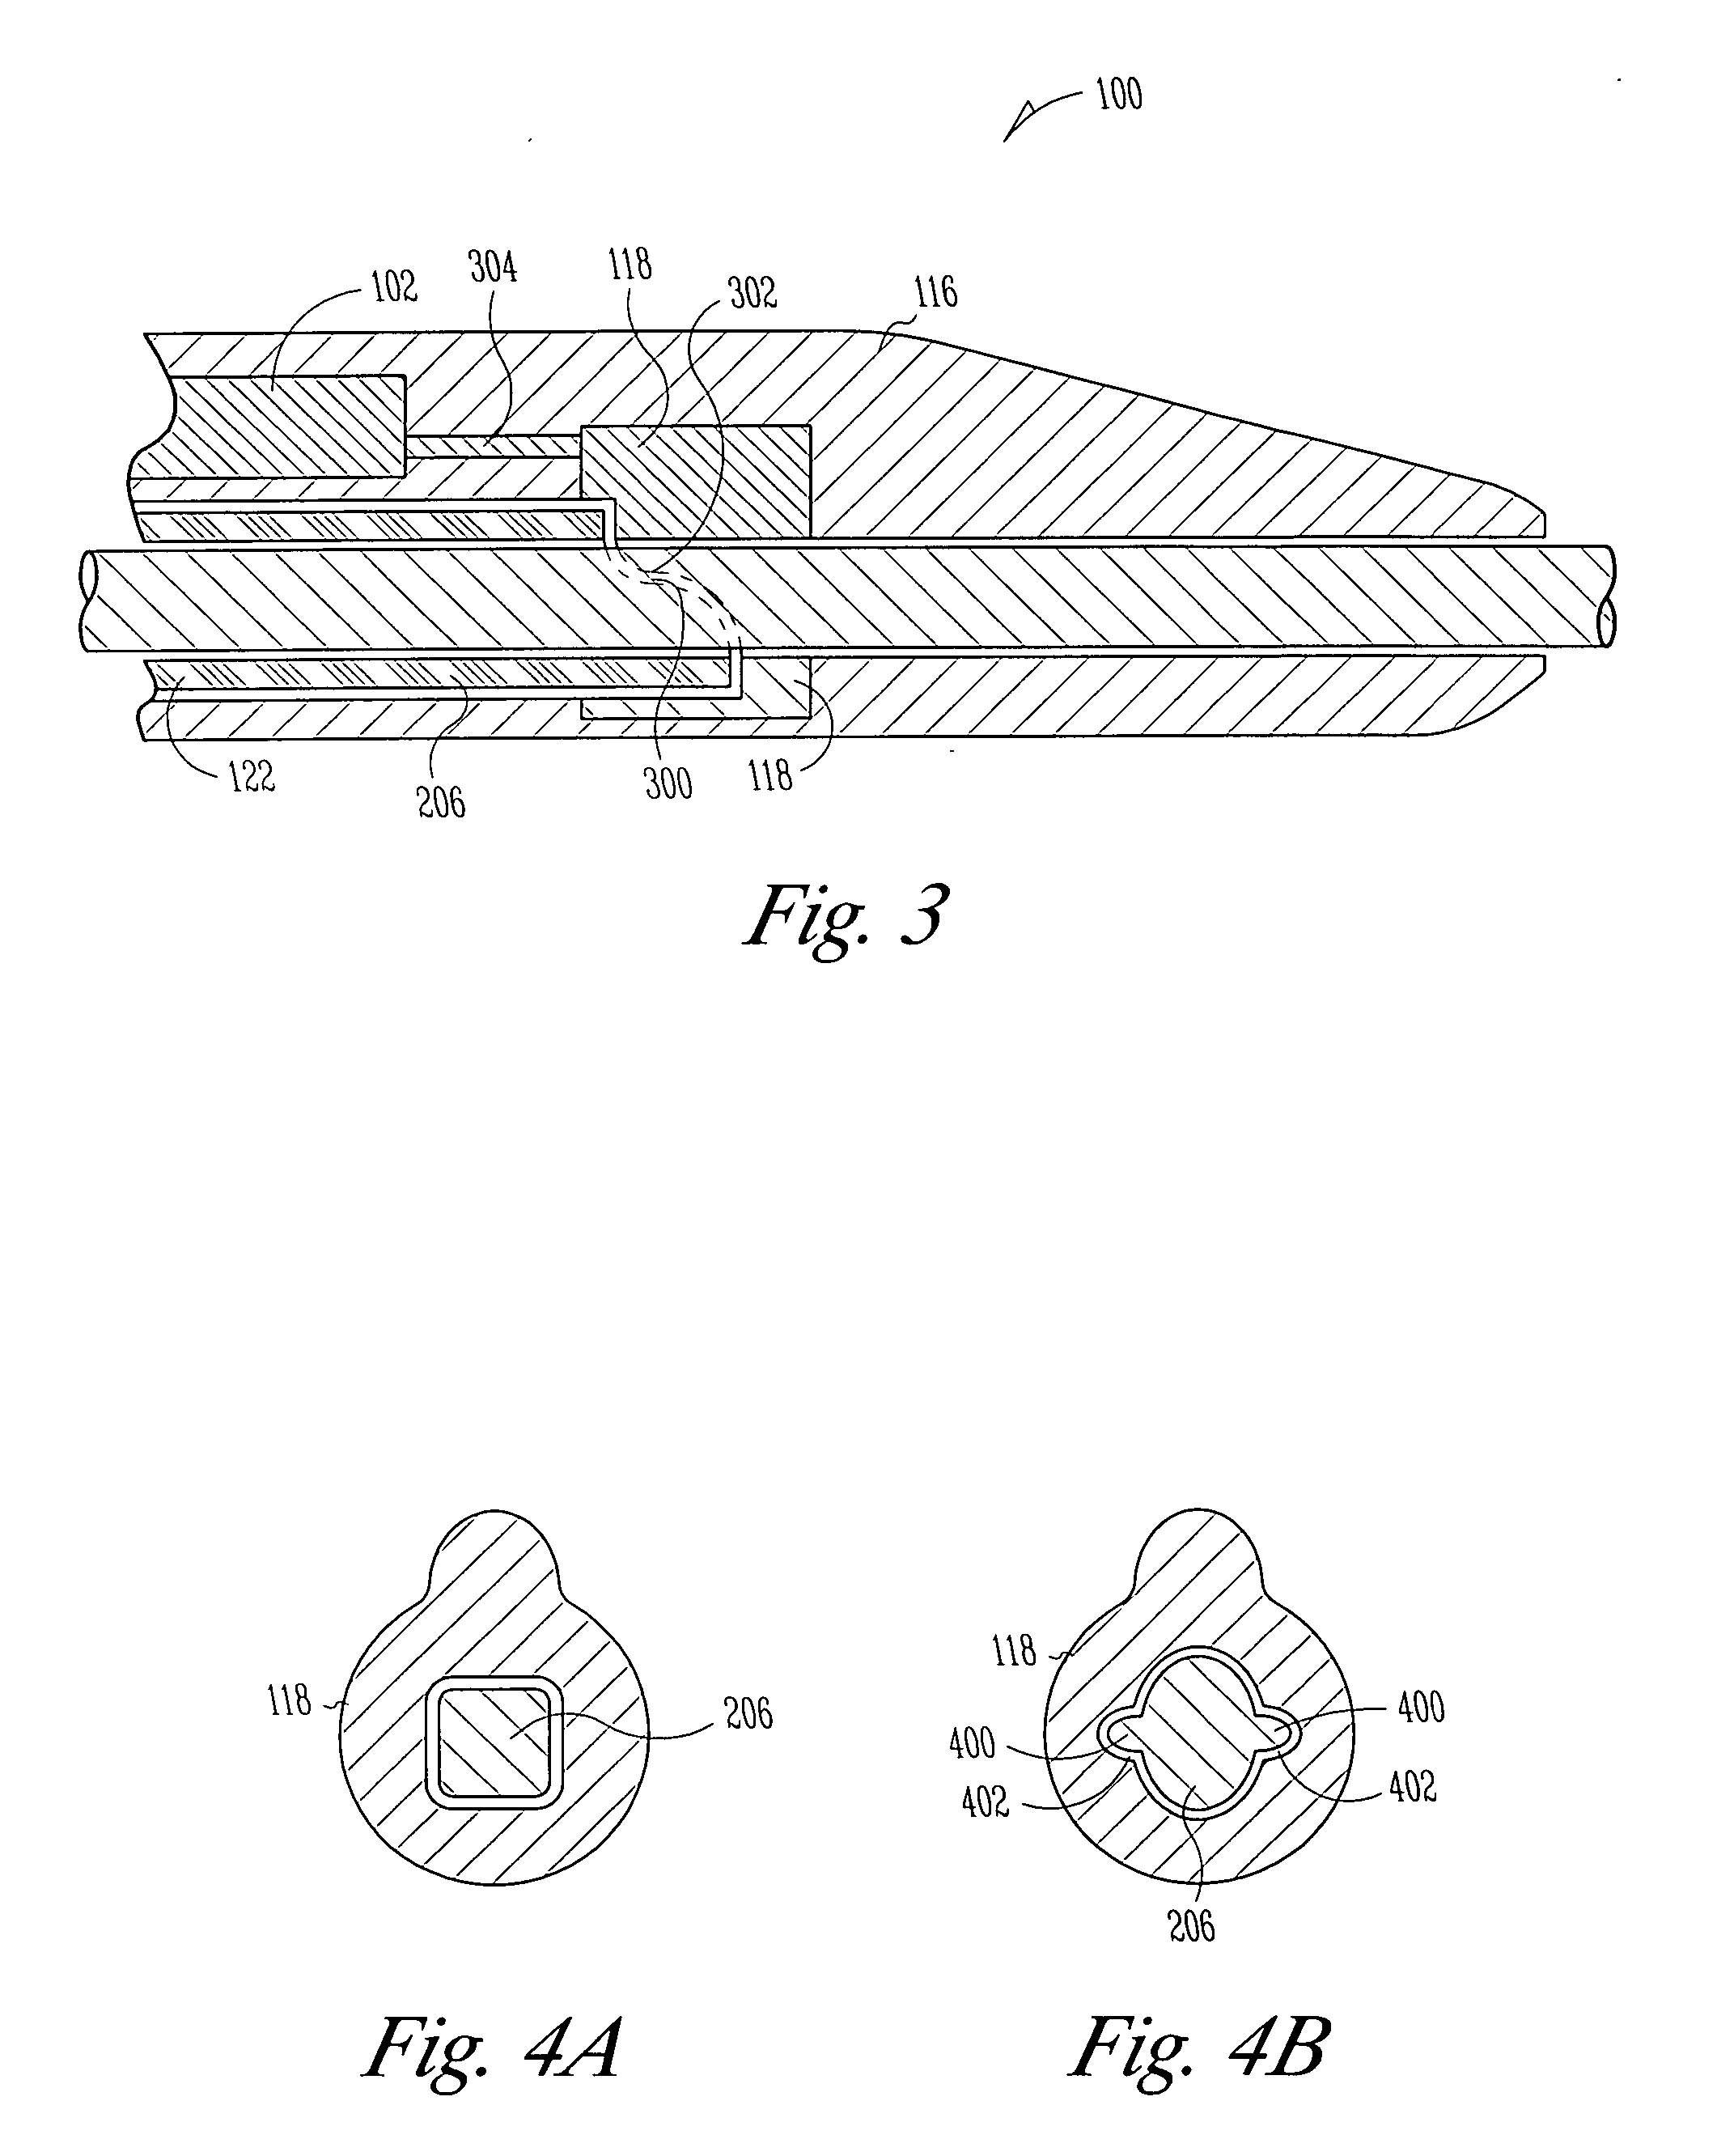 Lead assembly and methods including a push tube